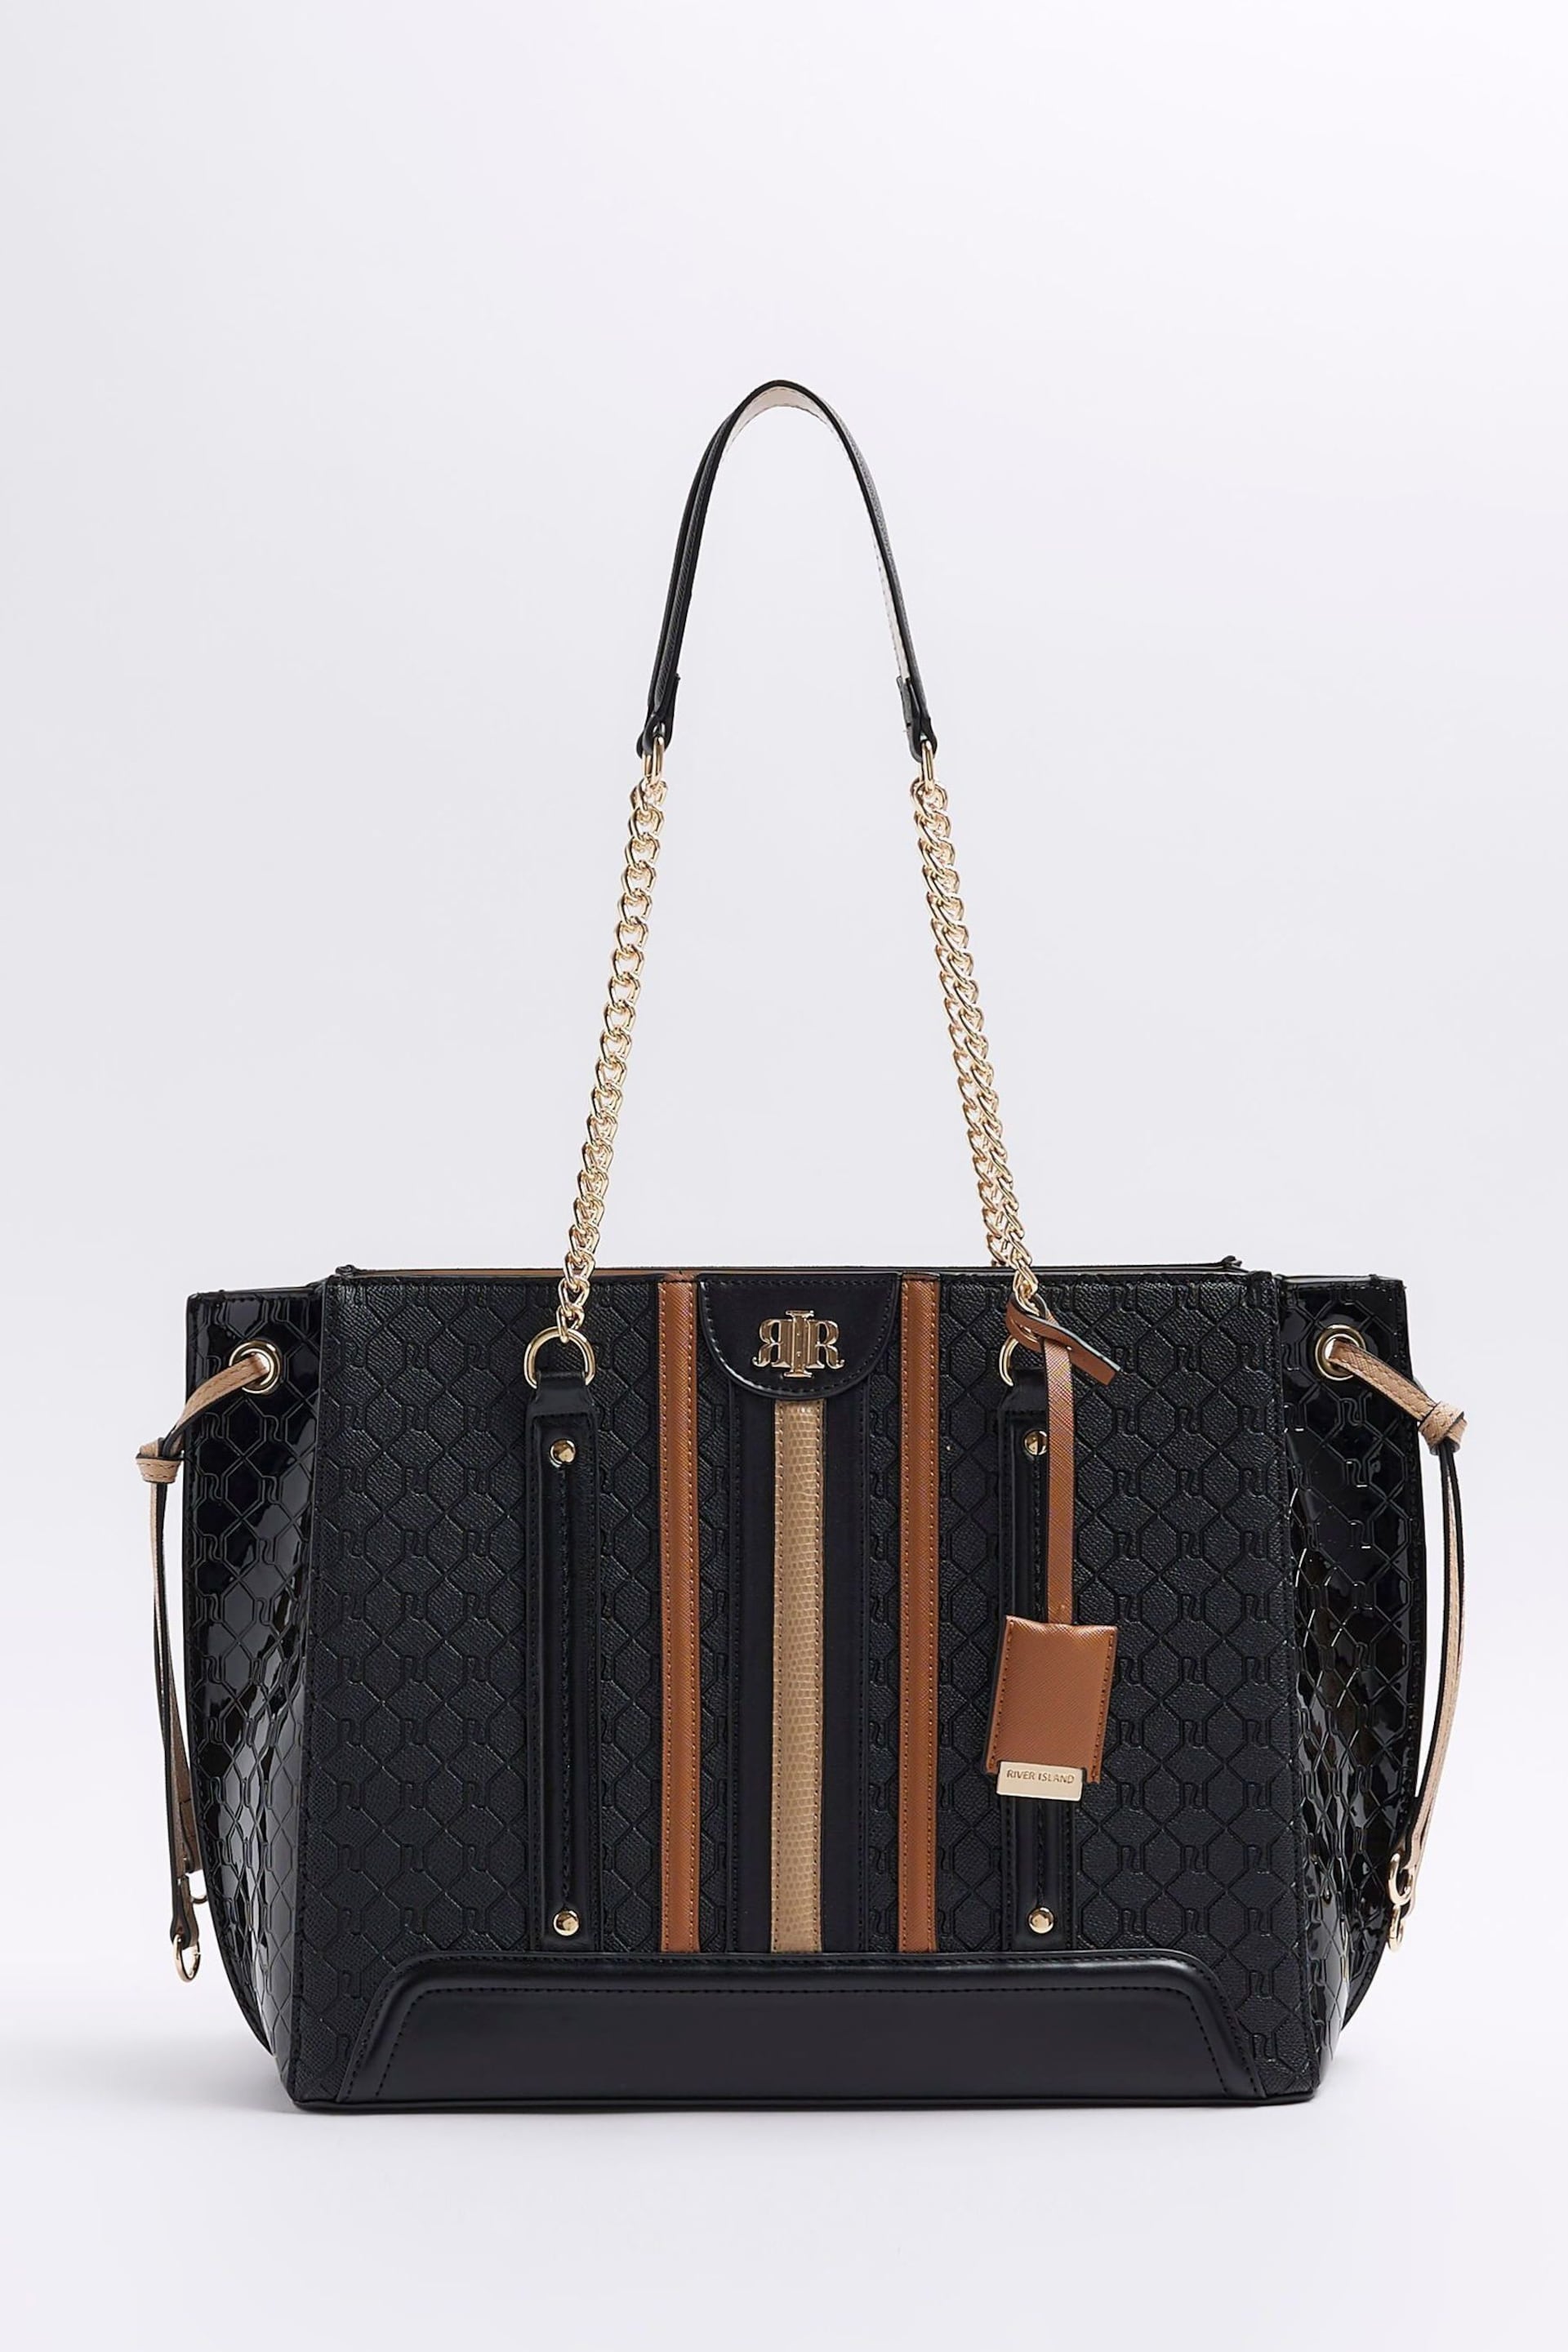 River Island Black Panelled Wing Tote Bag - Image 1 of 4